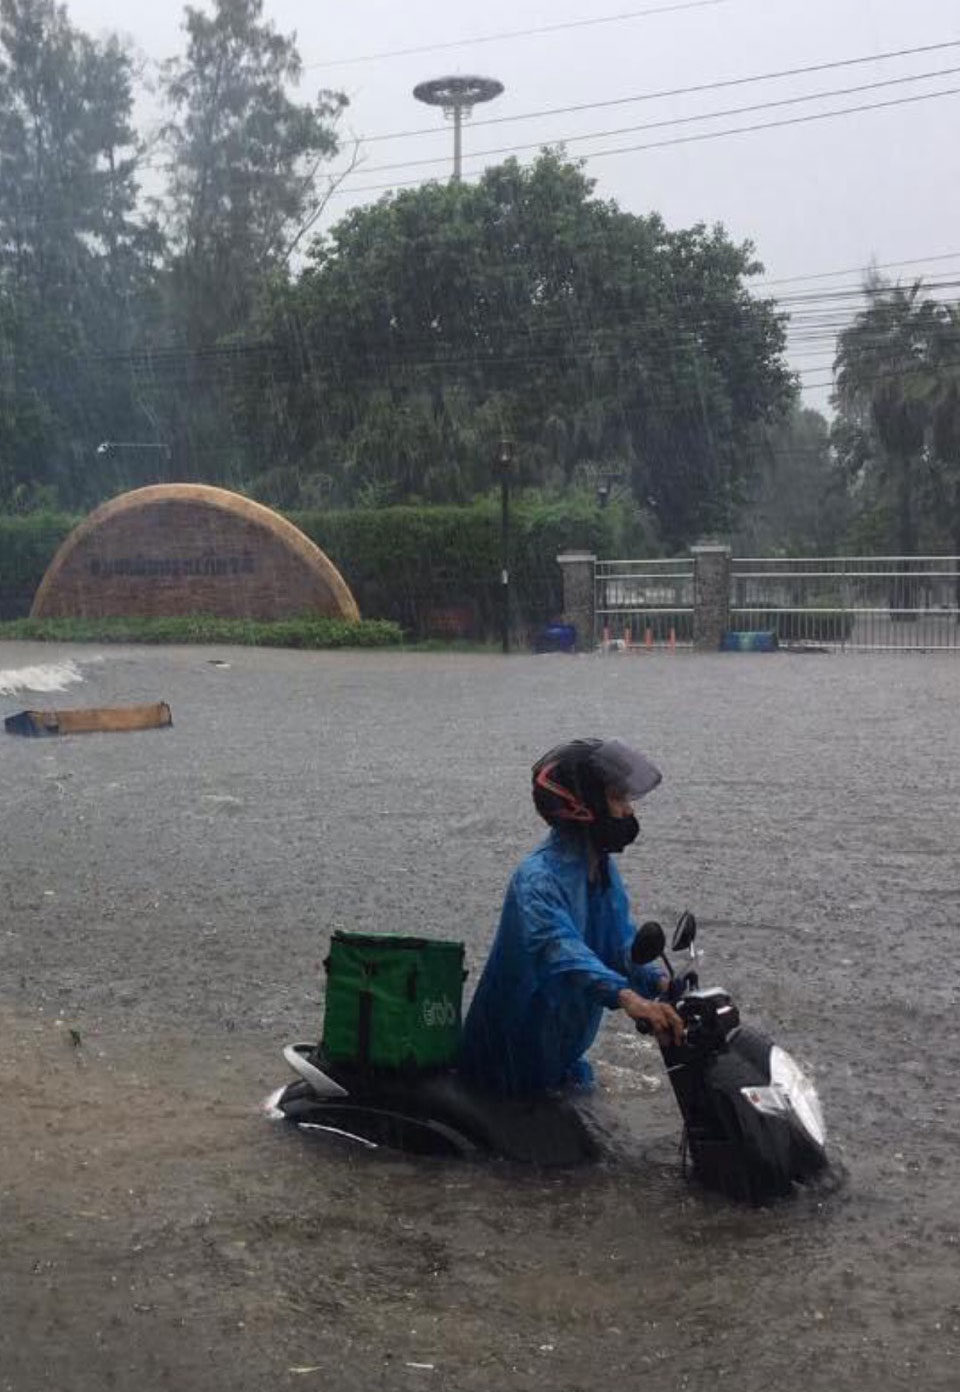 A food delivery man tries to move his bike through floodwater in front of Chalerm Phrakiart park in Muang district of Phuket on Saturday morning.